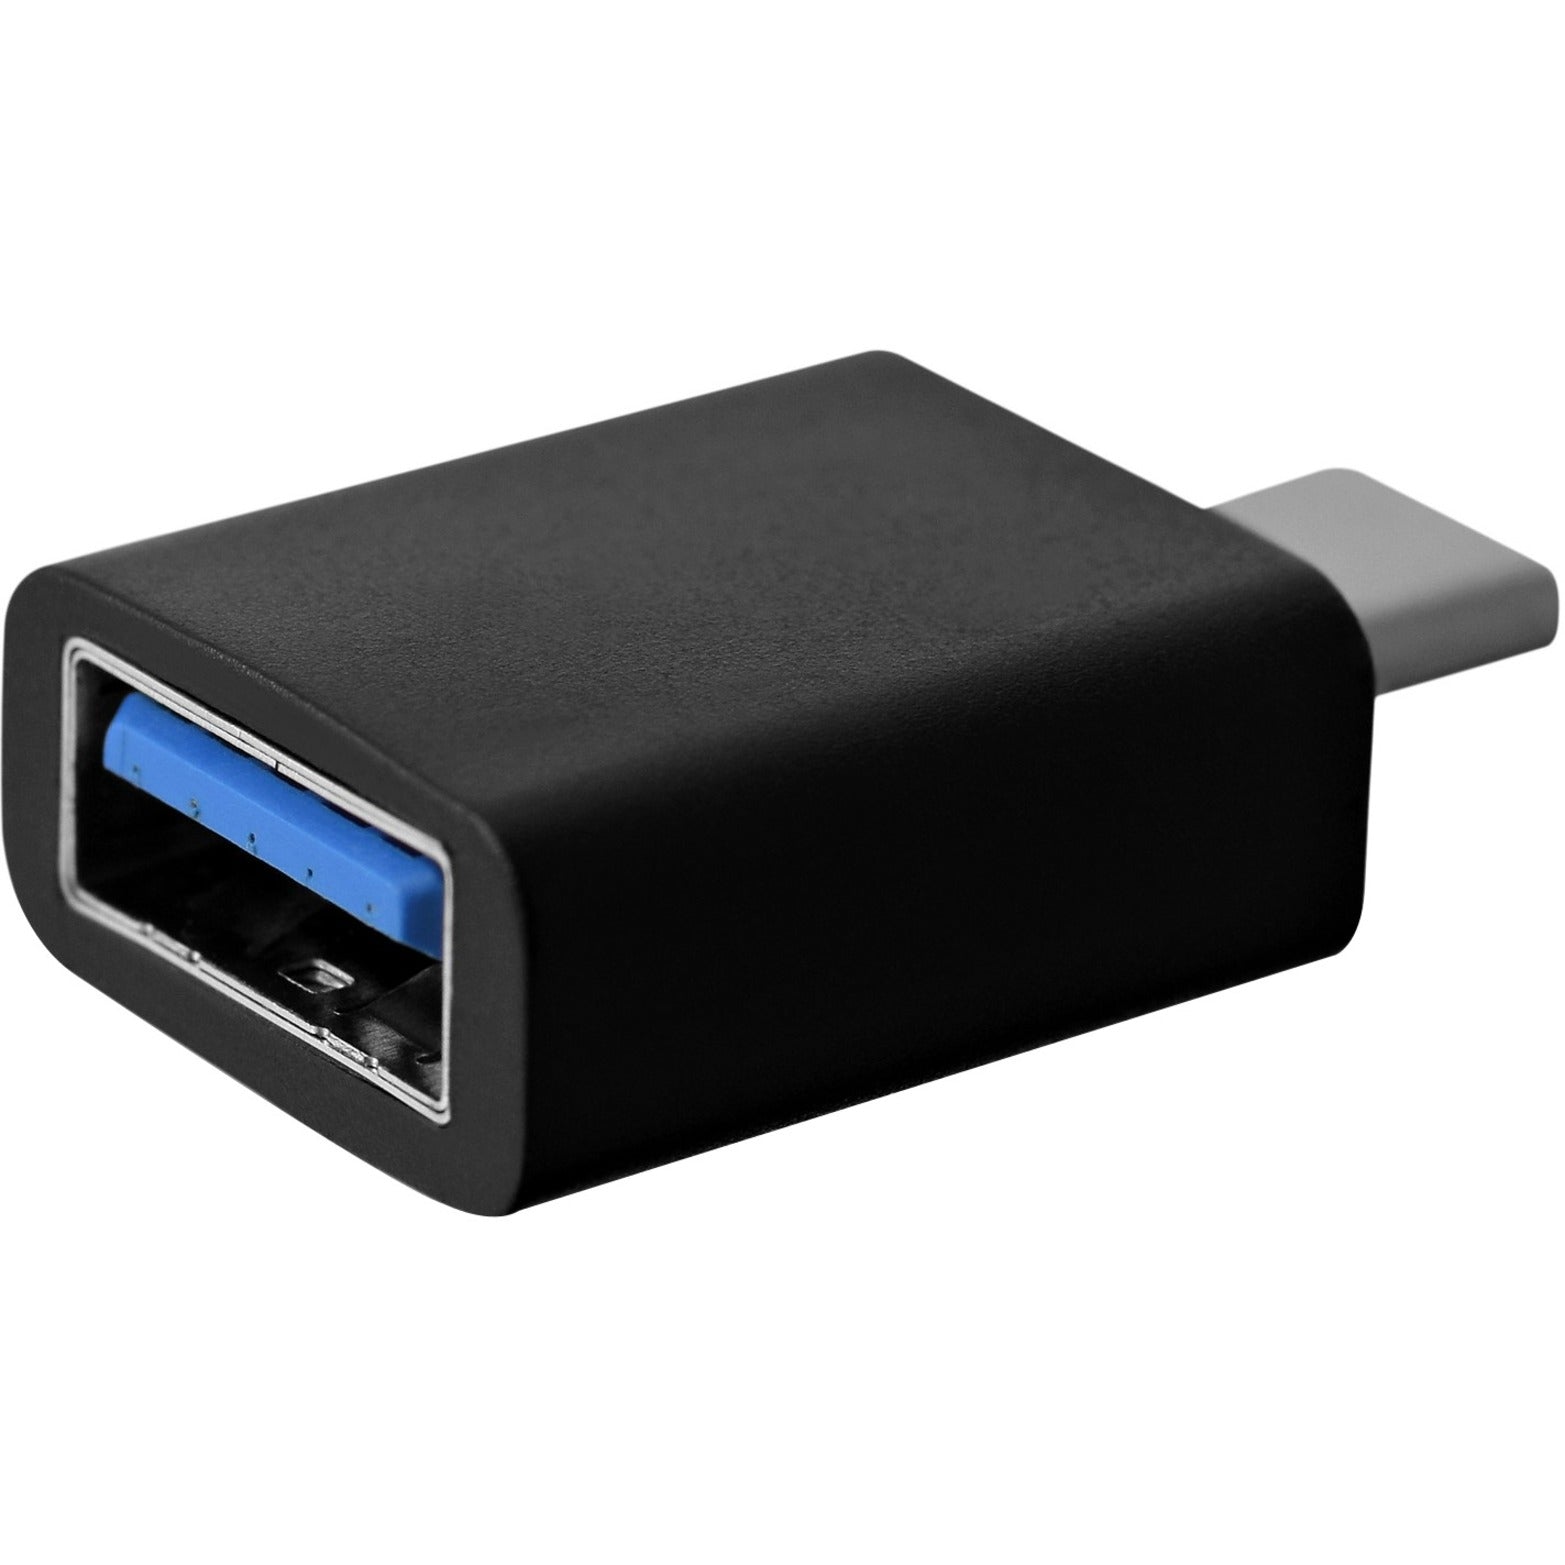 V7 V7U3C2A-BLK-1E Black USB Adapter USB-C Male to USB 3.1 Female, Plug and Play, Corrosion Resistance, Strain Relief